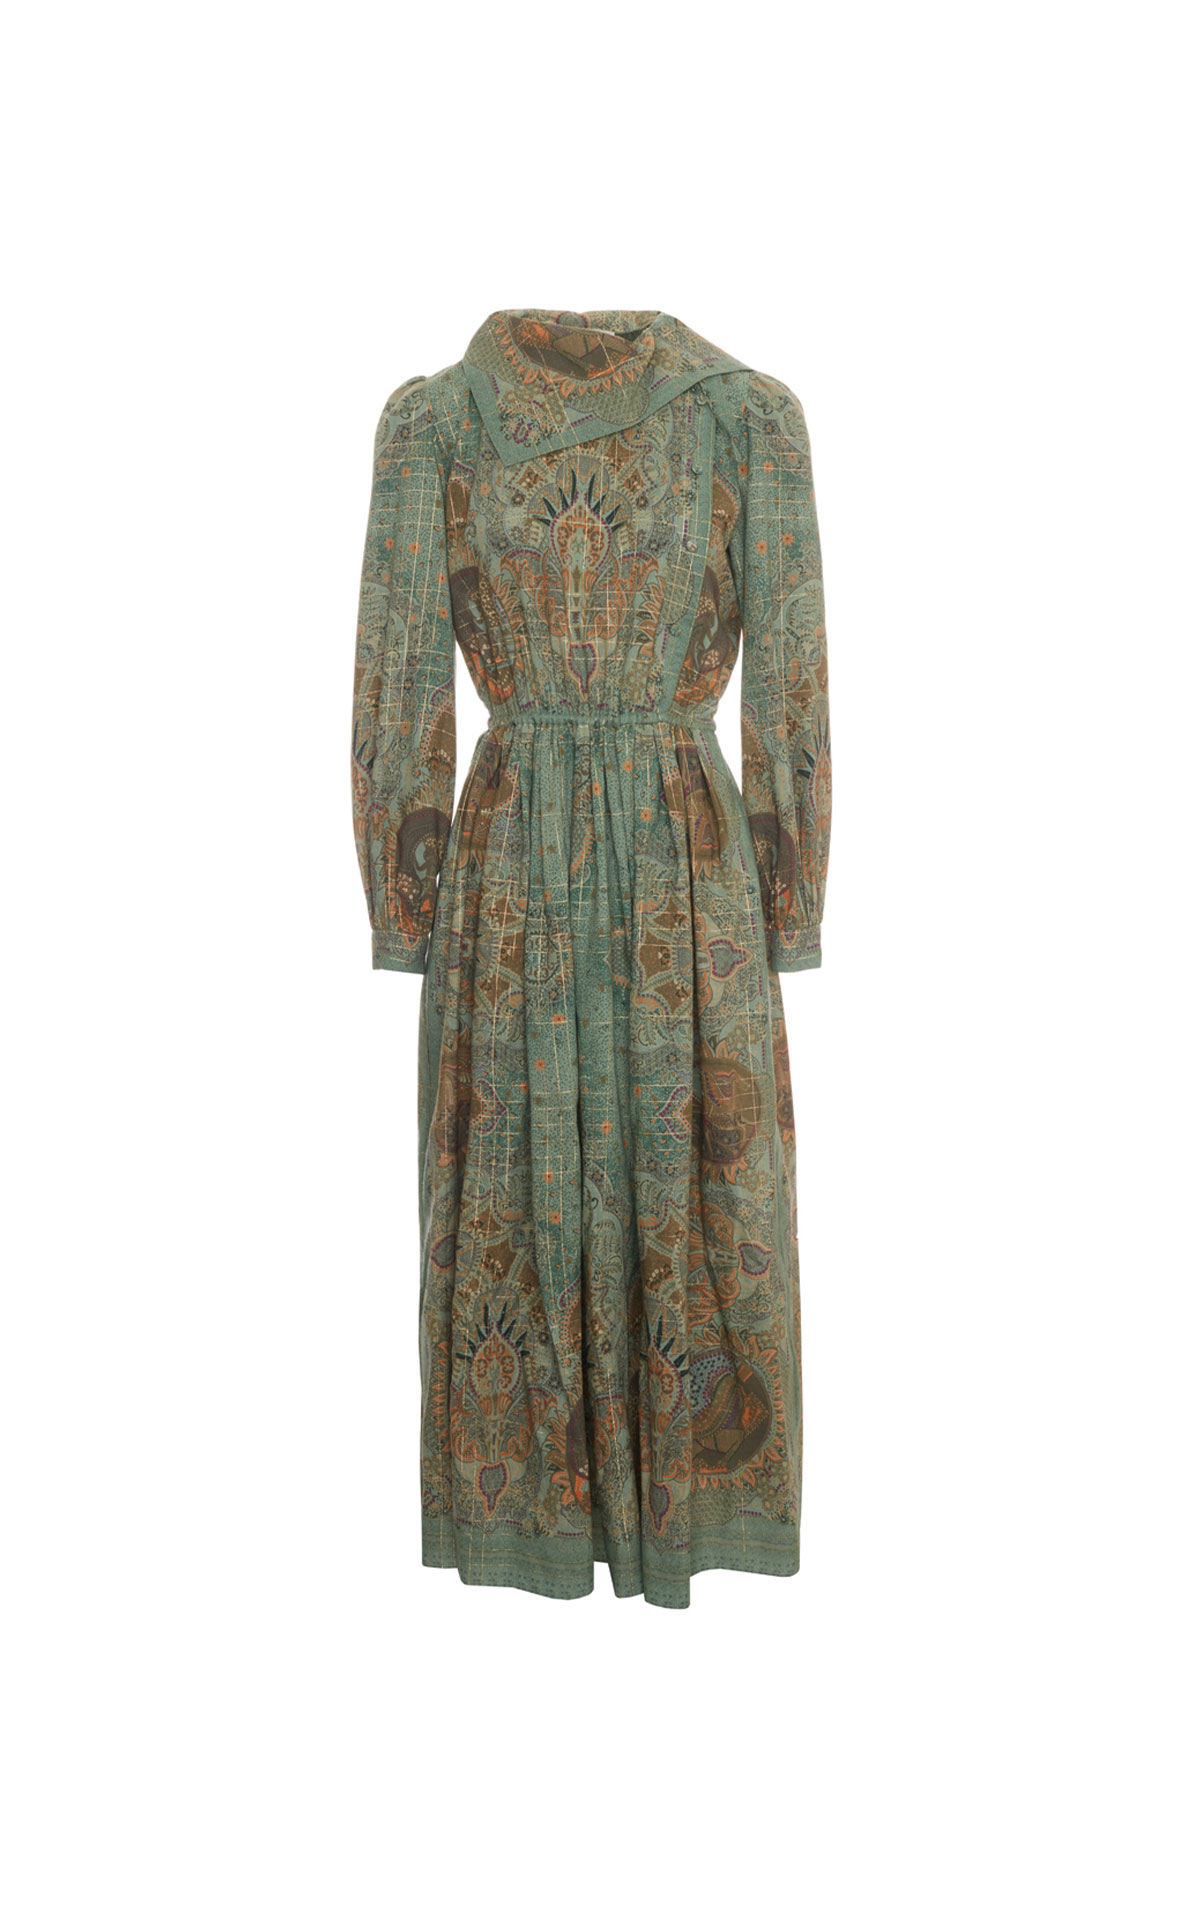 Etro Green printed dress from Bicester Village